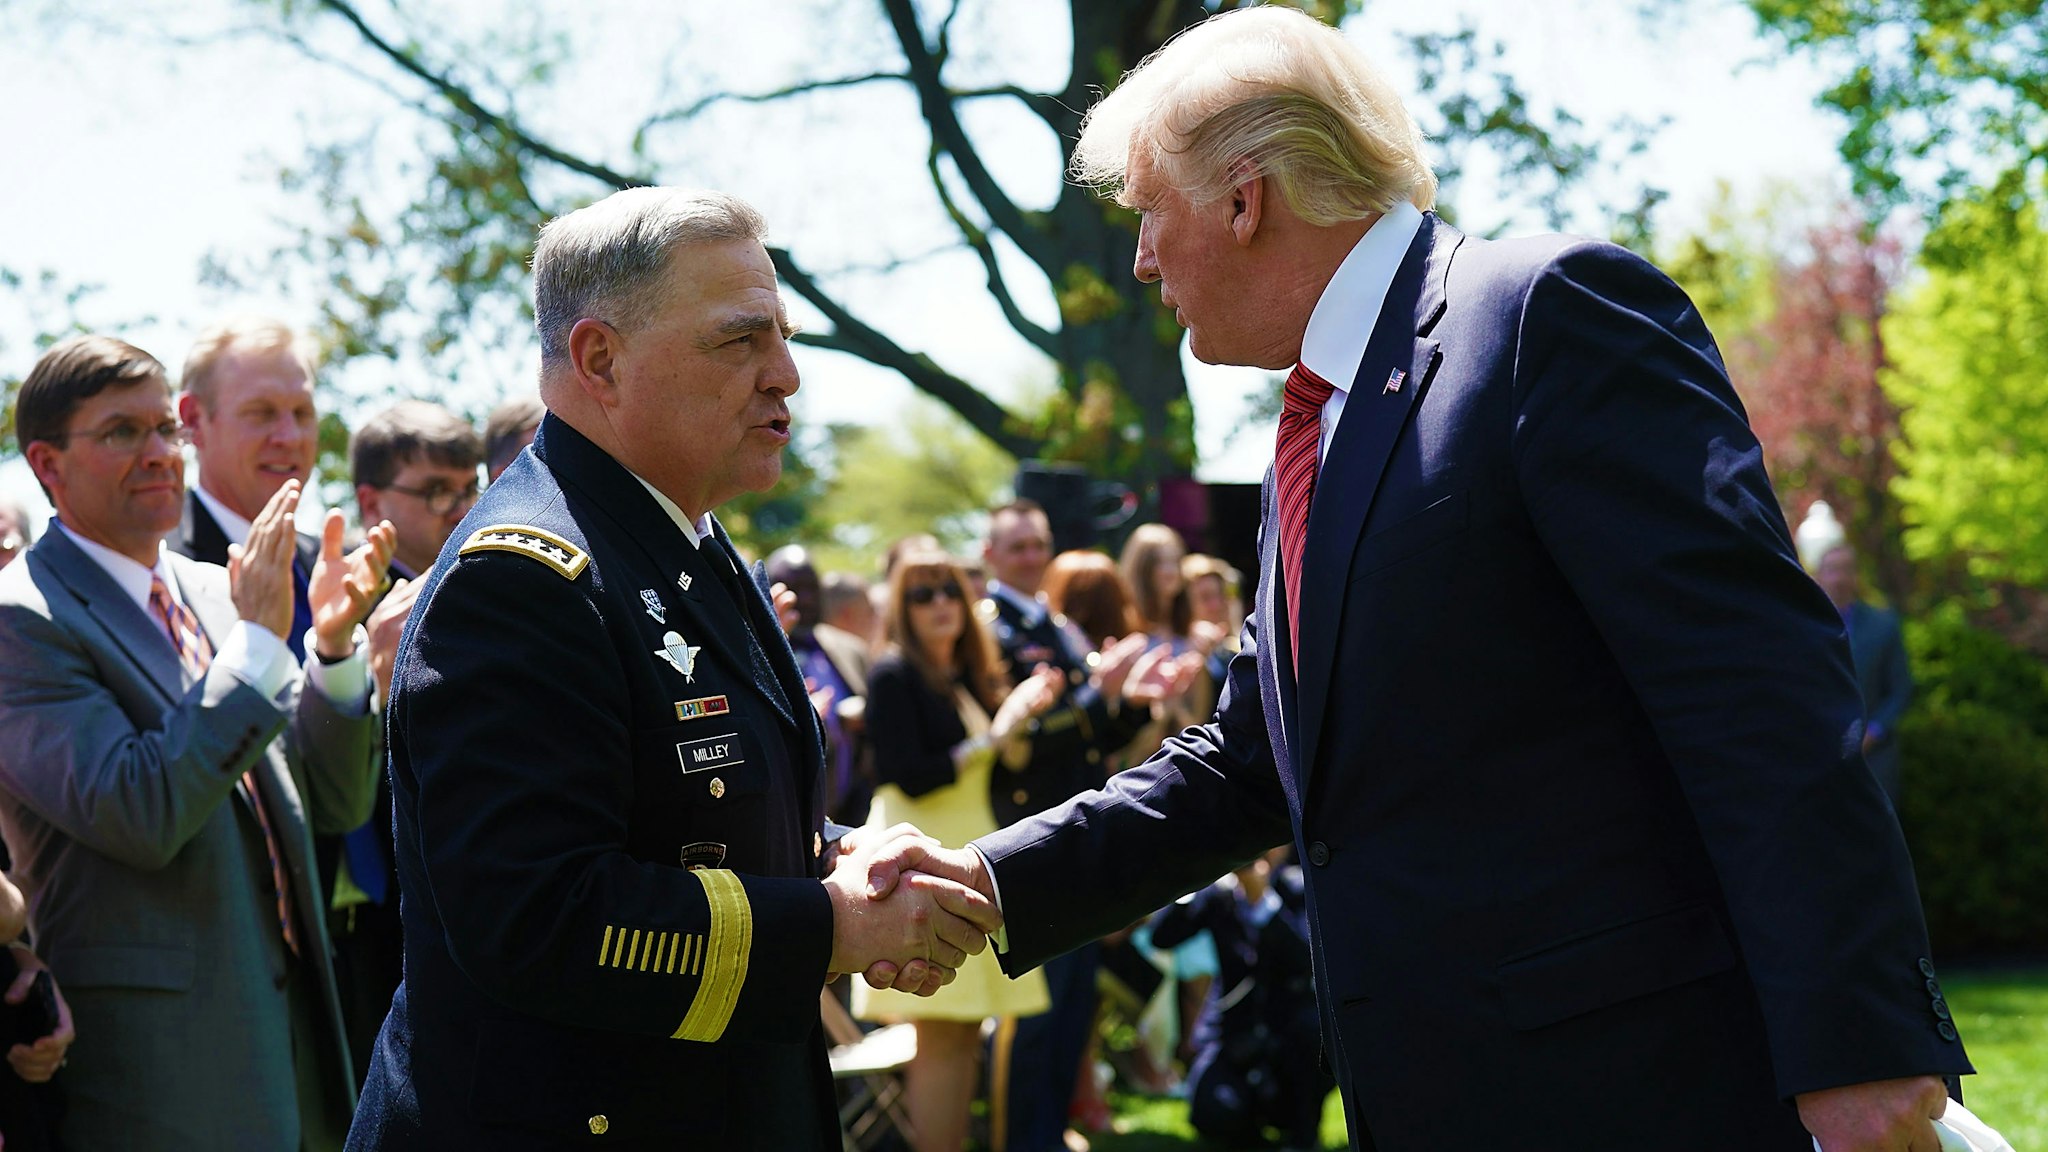 WASHINGTON, DC - MAY 01: U.S. President Donald Trump (R) shakes hands with U.S. Army Chief of Staff Mark Milley (L) during a Rose Garden event with the Army Black Knights football team of the U.S. Military Academy May 1, 2018 at the White House in Washington, DC. President Trump hosted the 2017 Commander in Chief's Trophy champion to honor their victory.